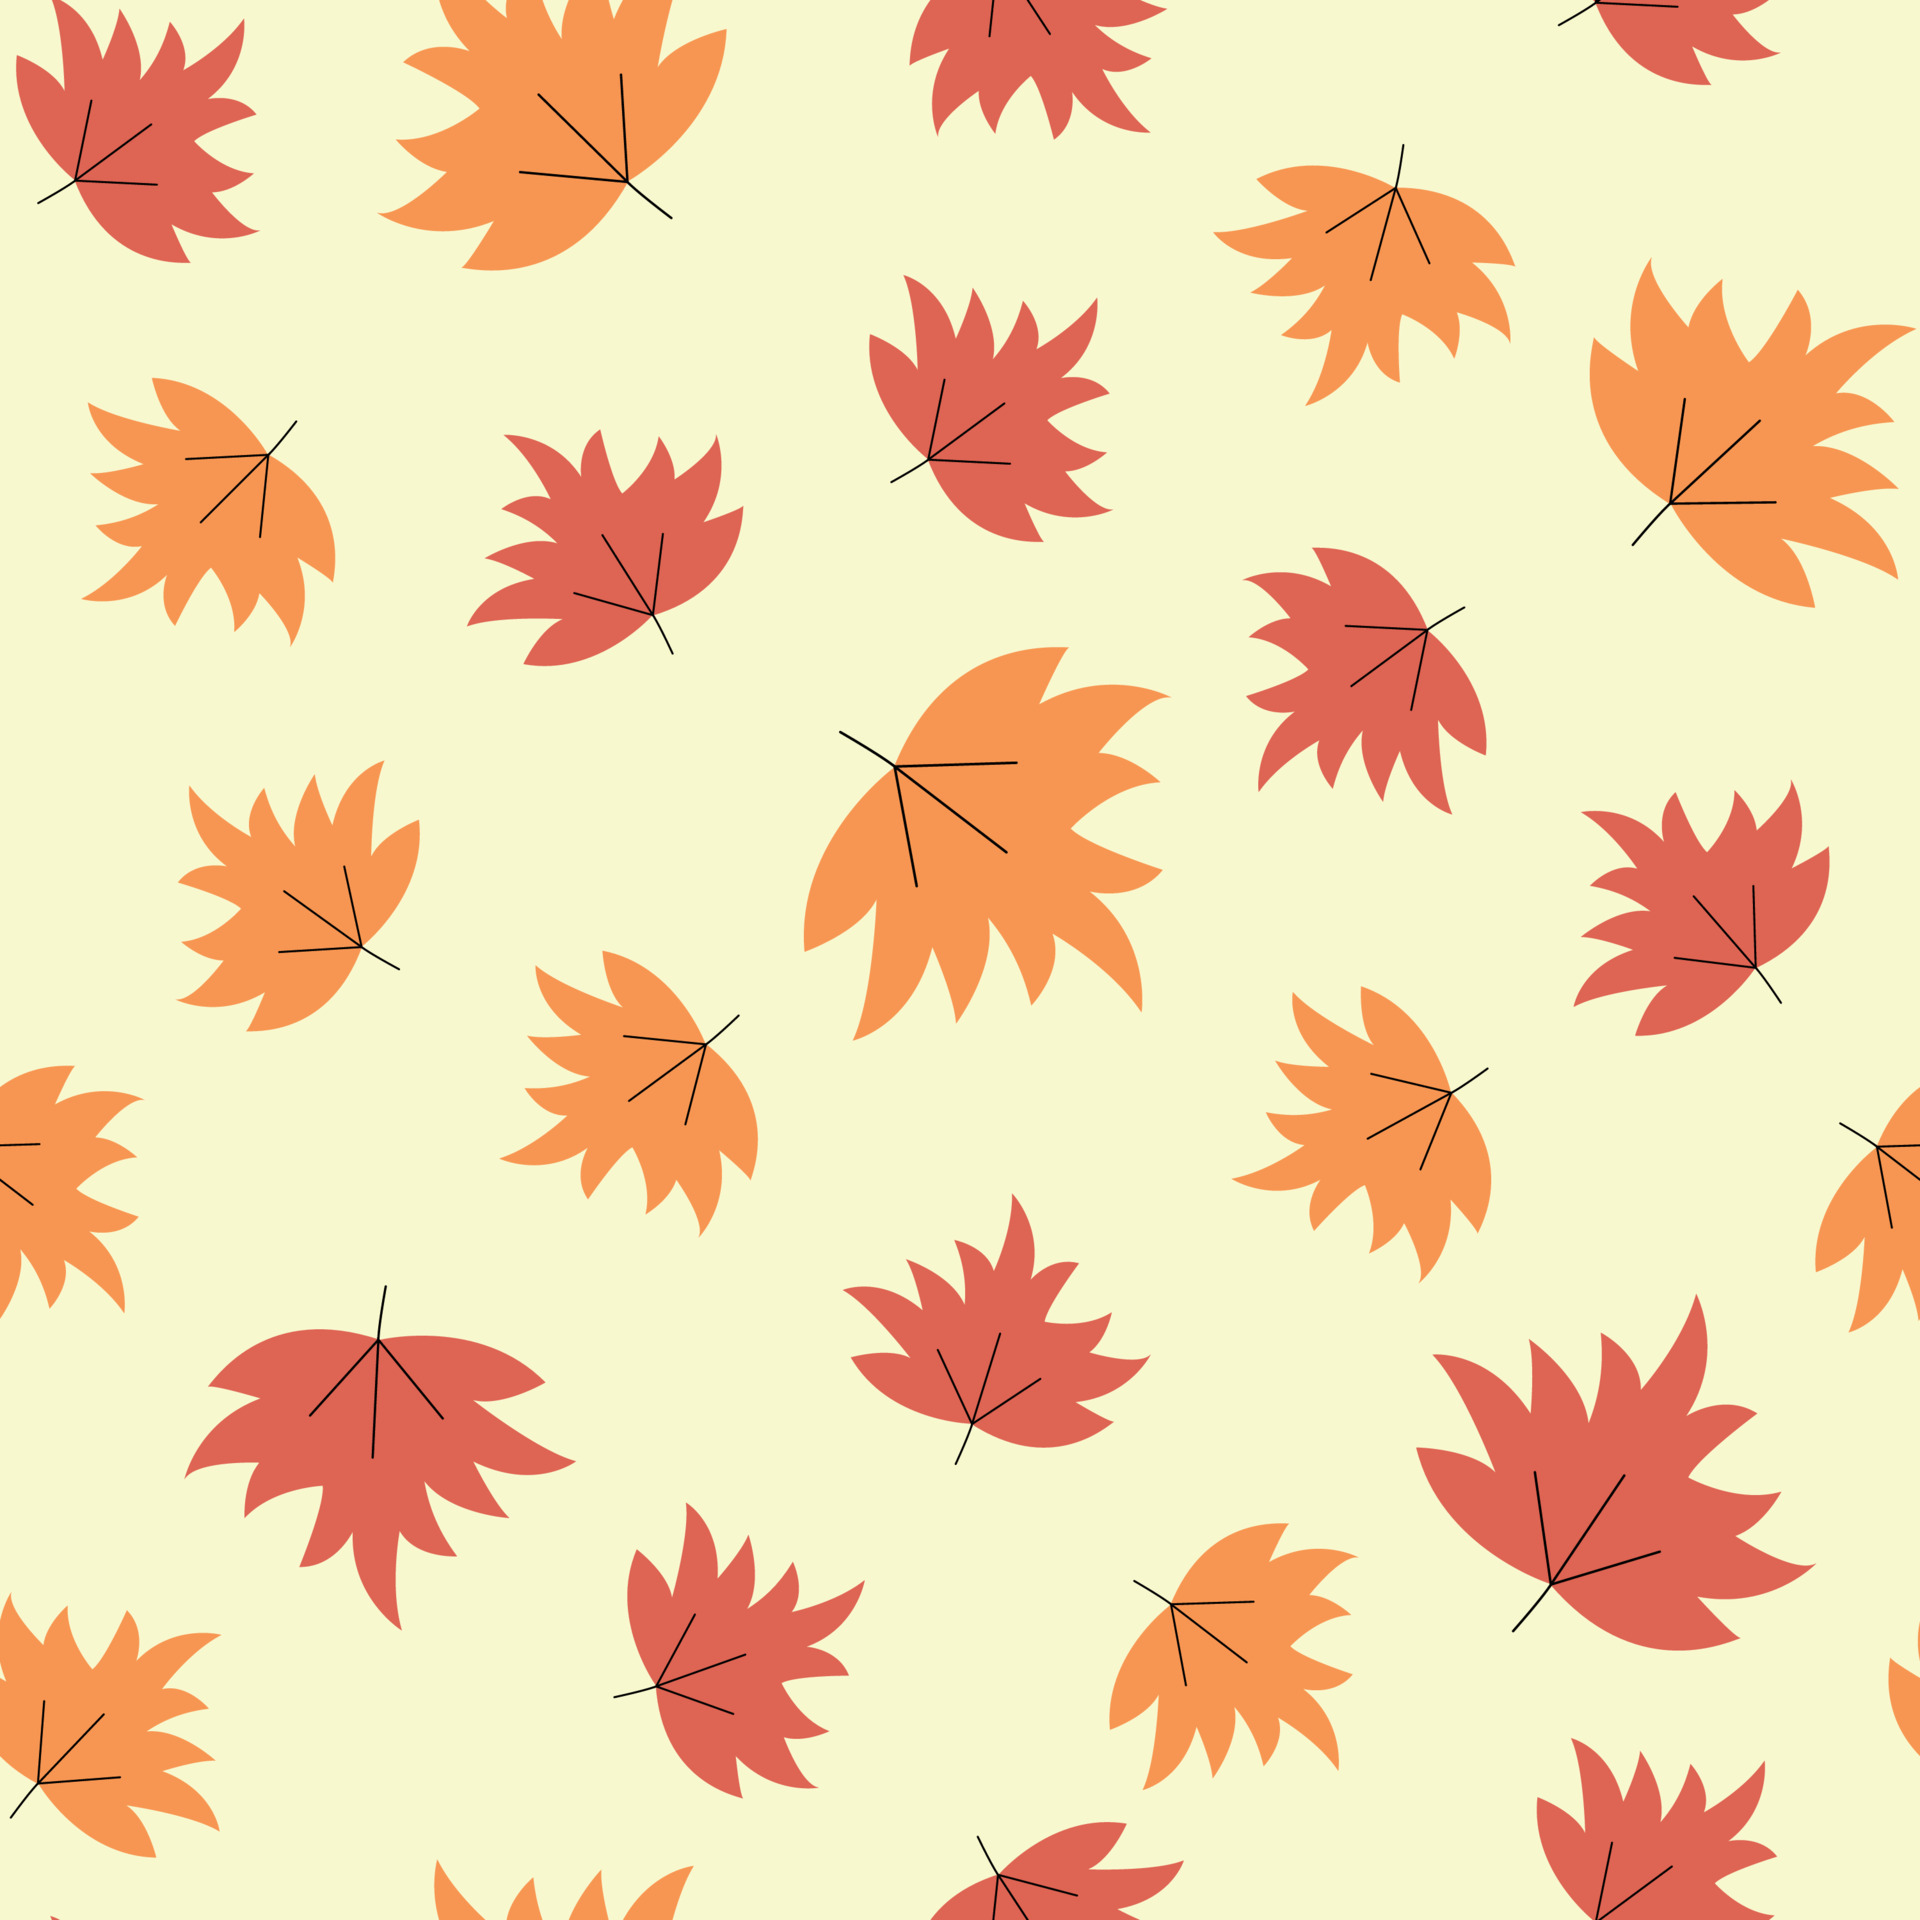 Autumn Wallpaper Seamless Pattern with Trees Stock Vector  Illustration  of design silhouette 95671580